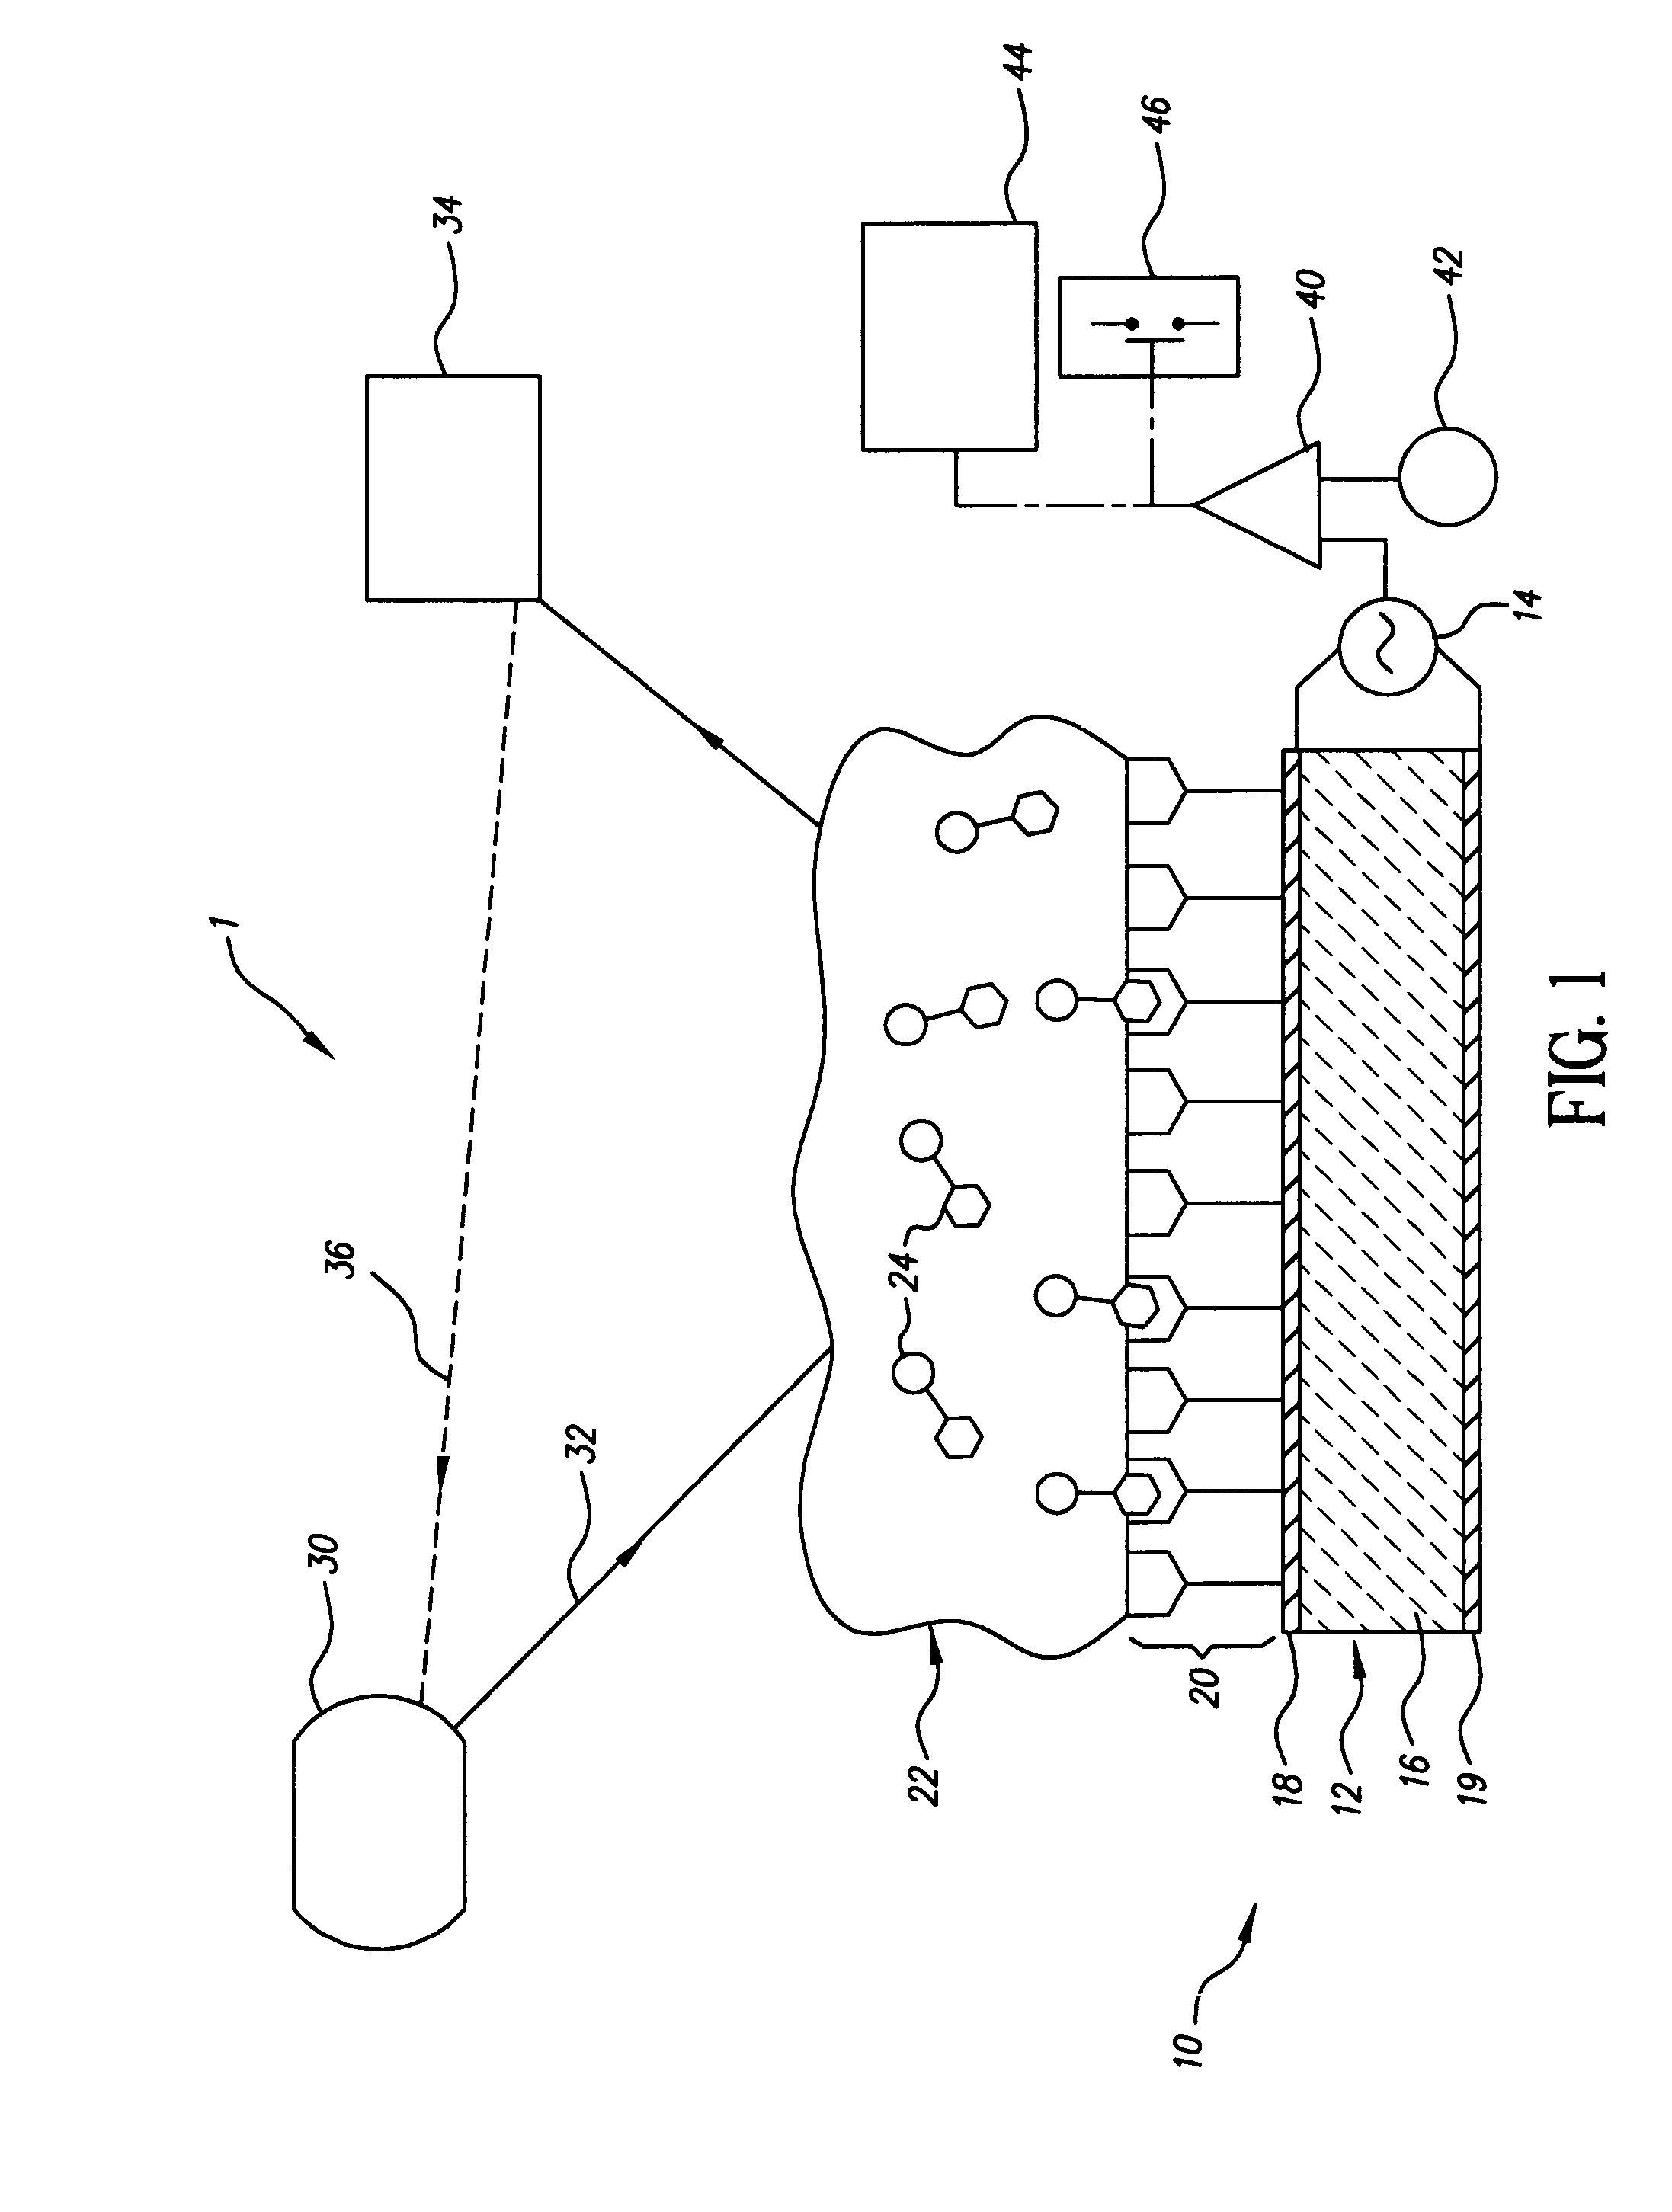 Process and device for ink quality control